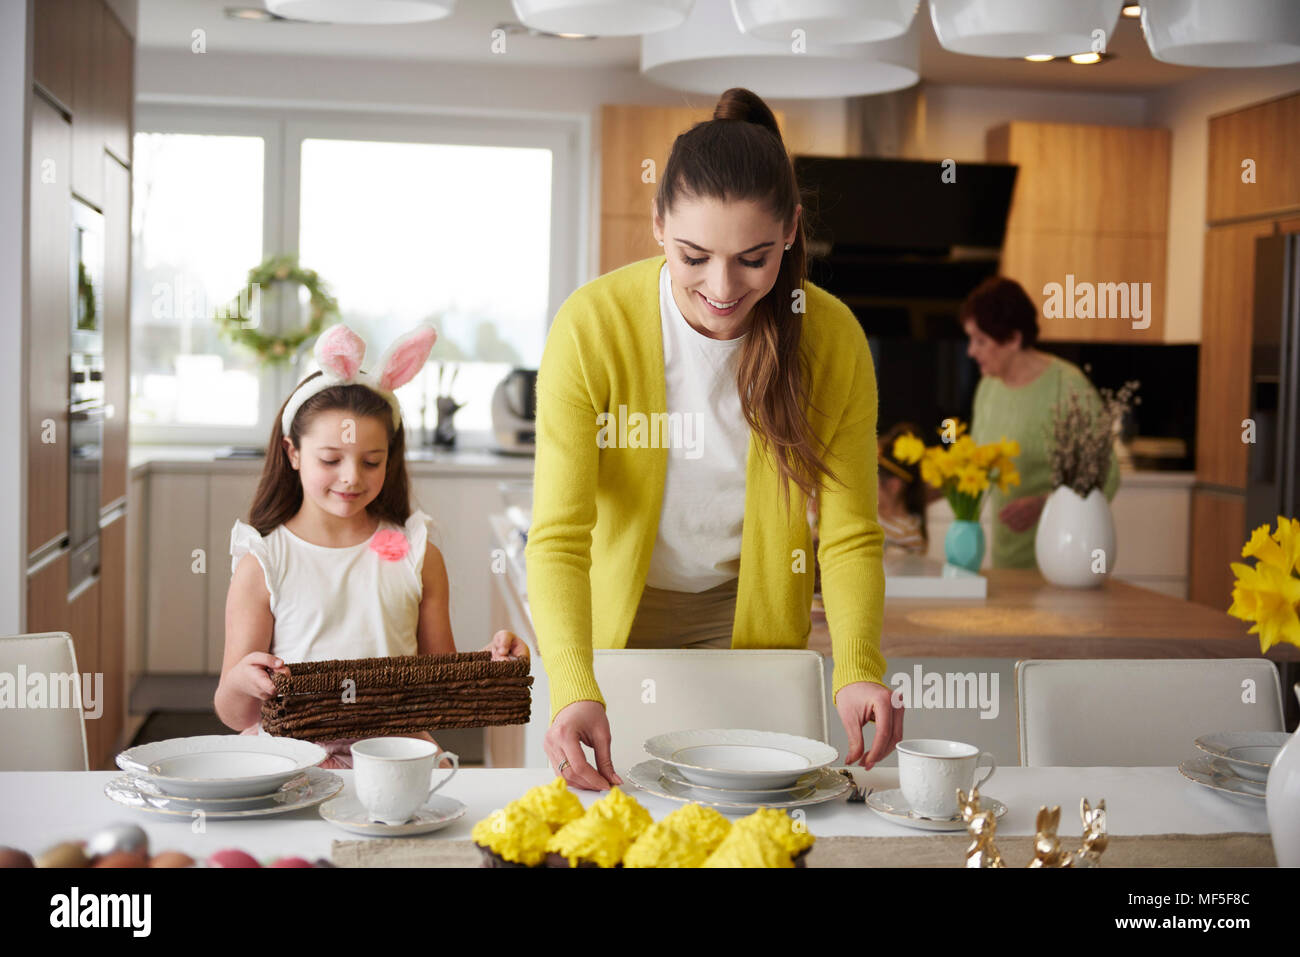 Smiling mother and daughter setting the table at home together Stock Photo